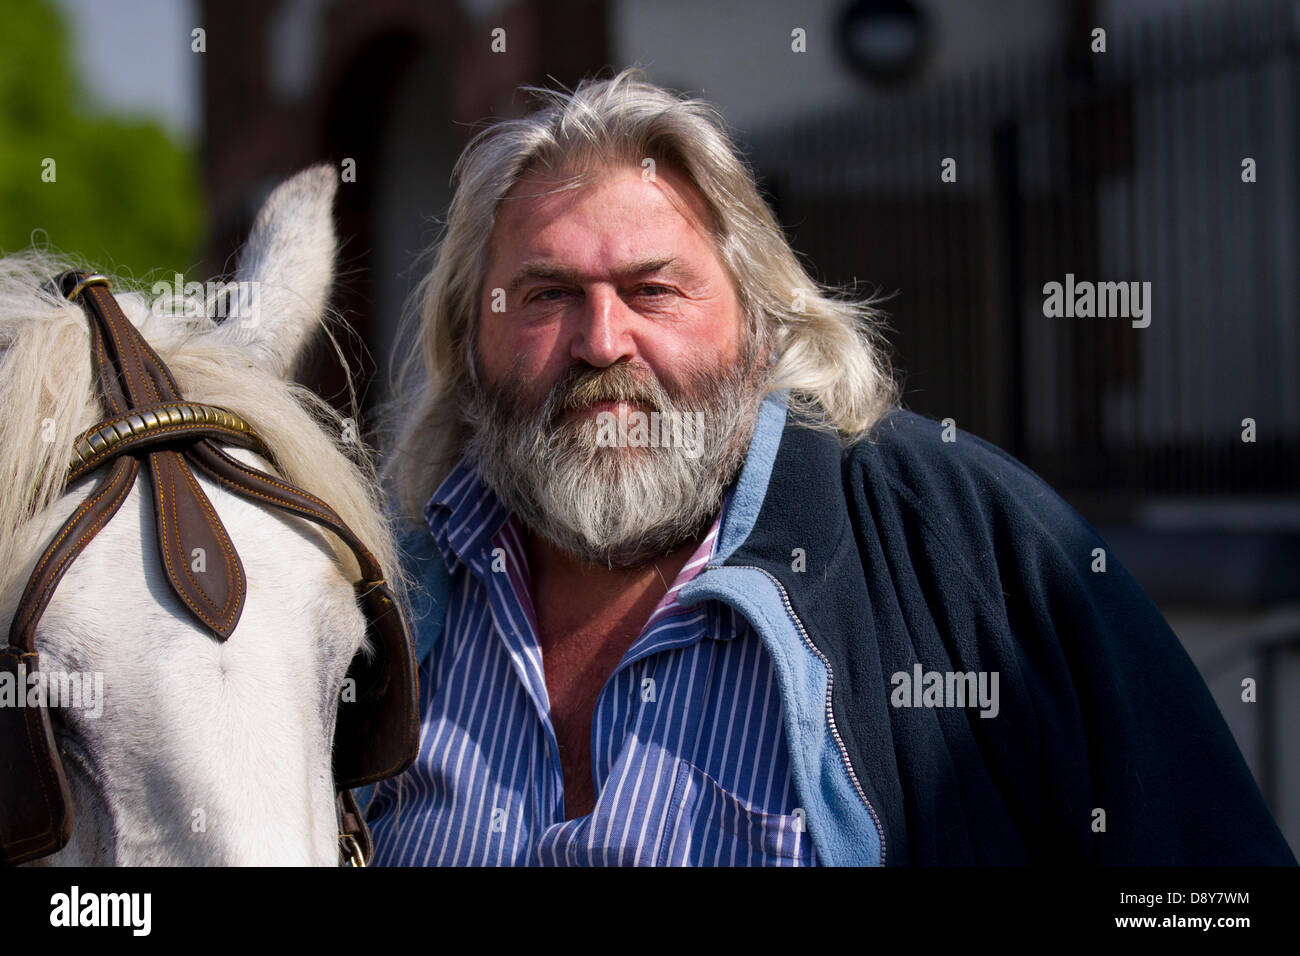 Appleby, Cumbria, Uk. 6th June, 2013.  Eddie Spurr 61, from Skegness Appleby, at the Appleby Horse Fair in Cumbria.  The Fair is an annual gathering of Gypsies and Travellers which takes place on the first week in June, and has taken place since the reign of James II, who granted a Royal charter in 1685 allowing a horse fair 'near to the River Eden', and is the largest gathering of its kind in Europe. Credit:  Mar Photographics/Alamy Live News Stock Photo